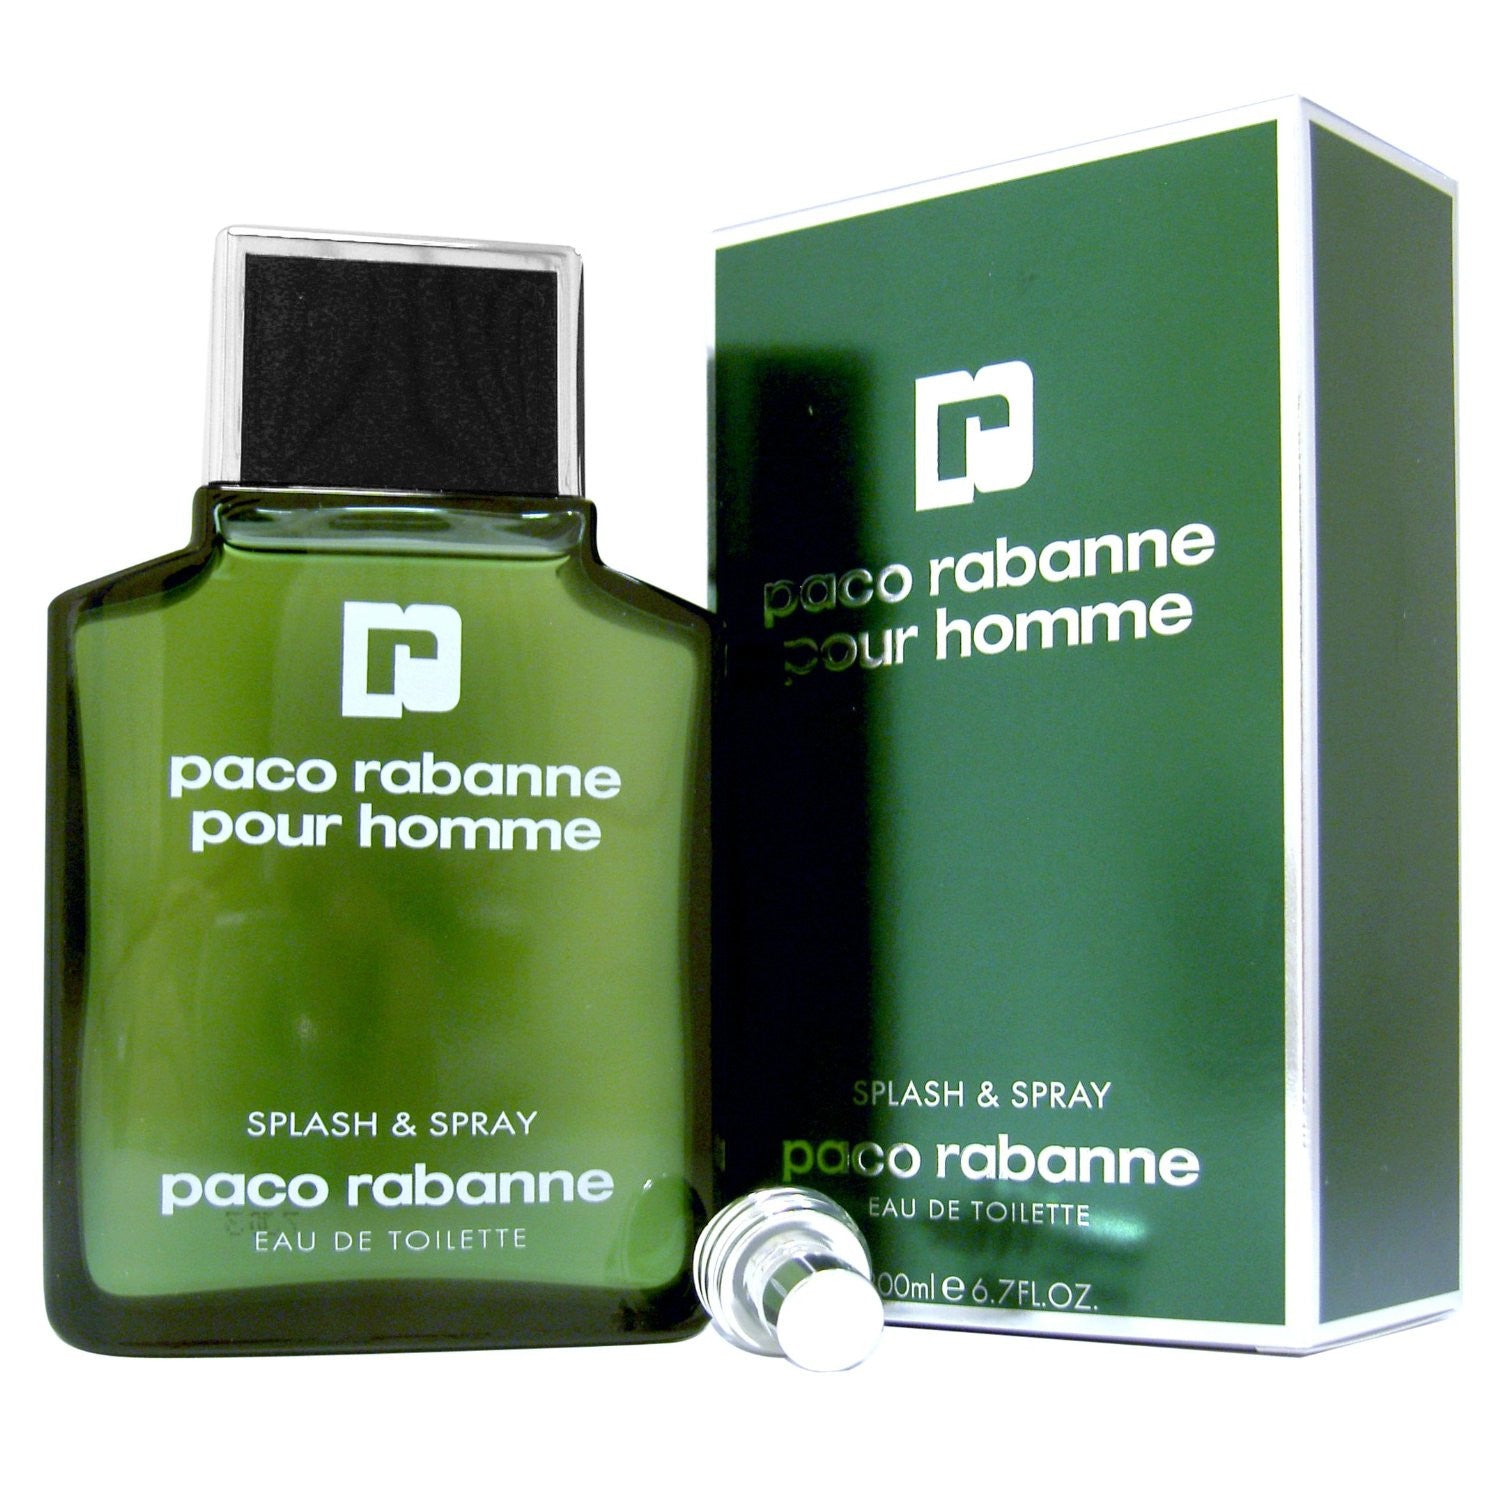 Paco rabanne homme. Paco Rabanne мужские pour Home. Пако Рабан мужские 200 мл. Paco Rabanne Paco Rabanne pour homme 200 мл. Мужские духи Пако Рабан зеленая.